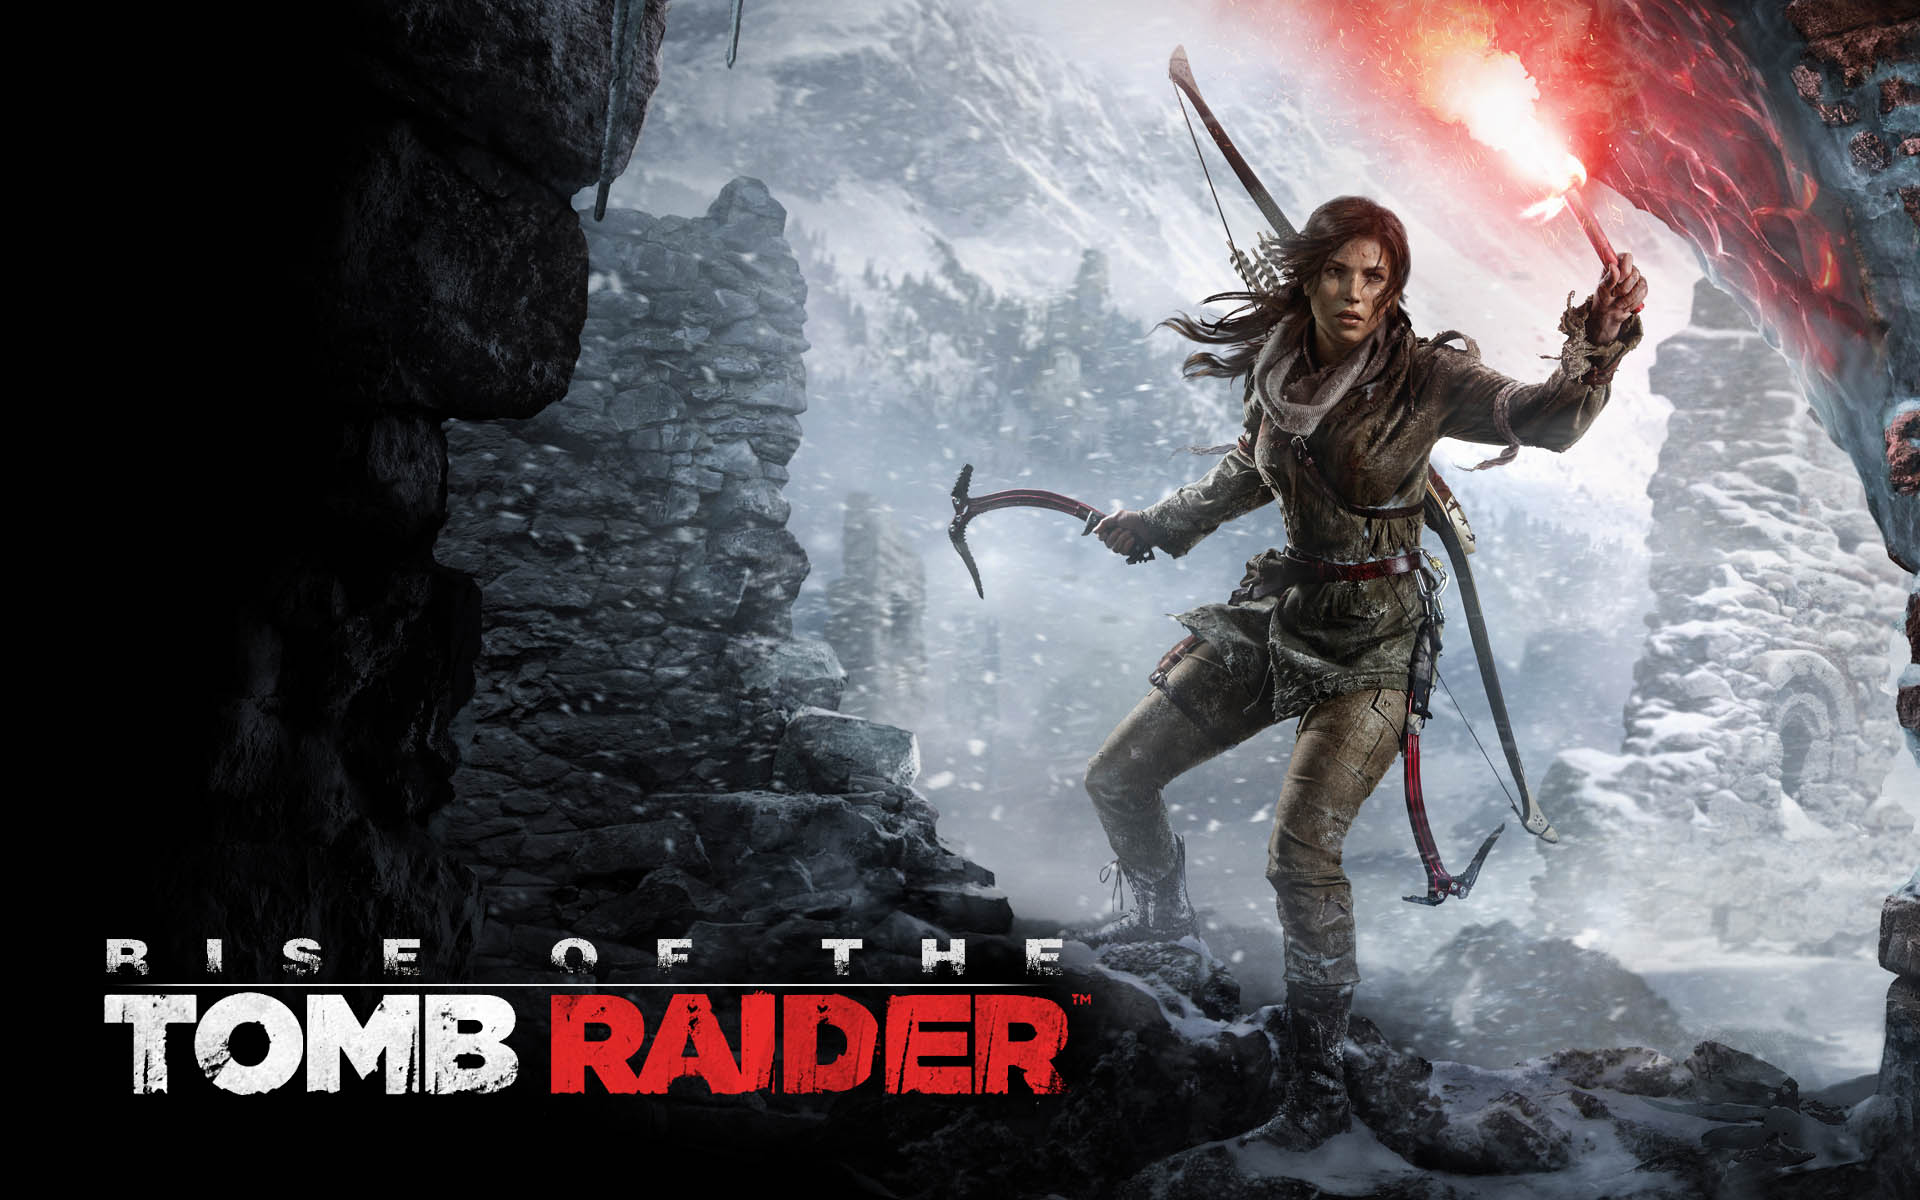 rise of the tomb raider AMD RYZEN 5 2600 PROCESSOR REVIEW